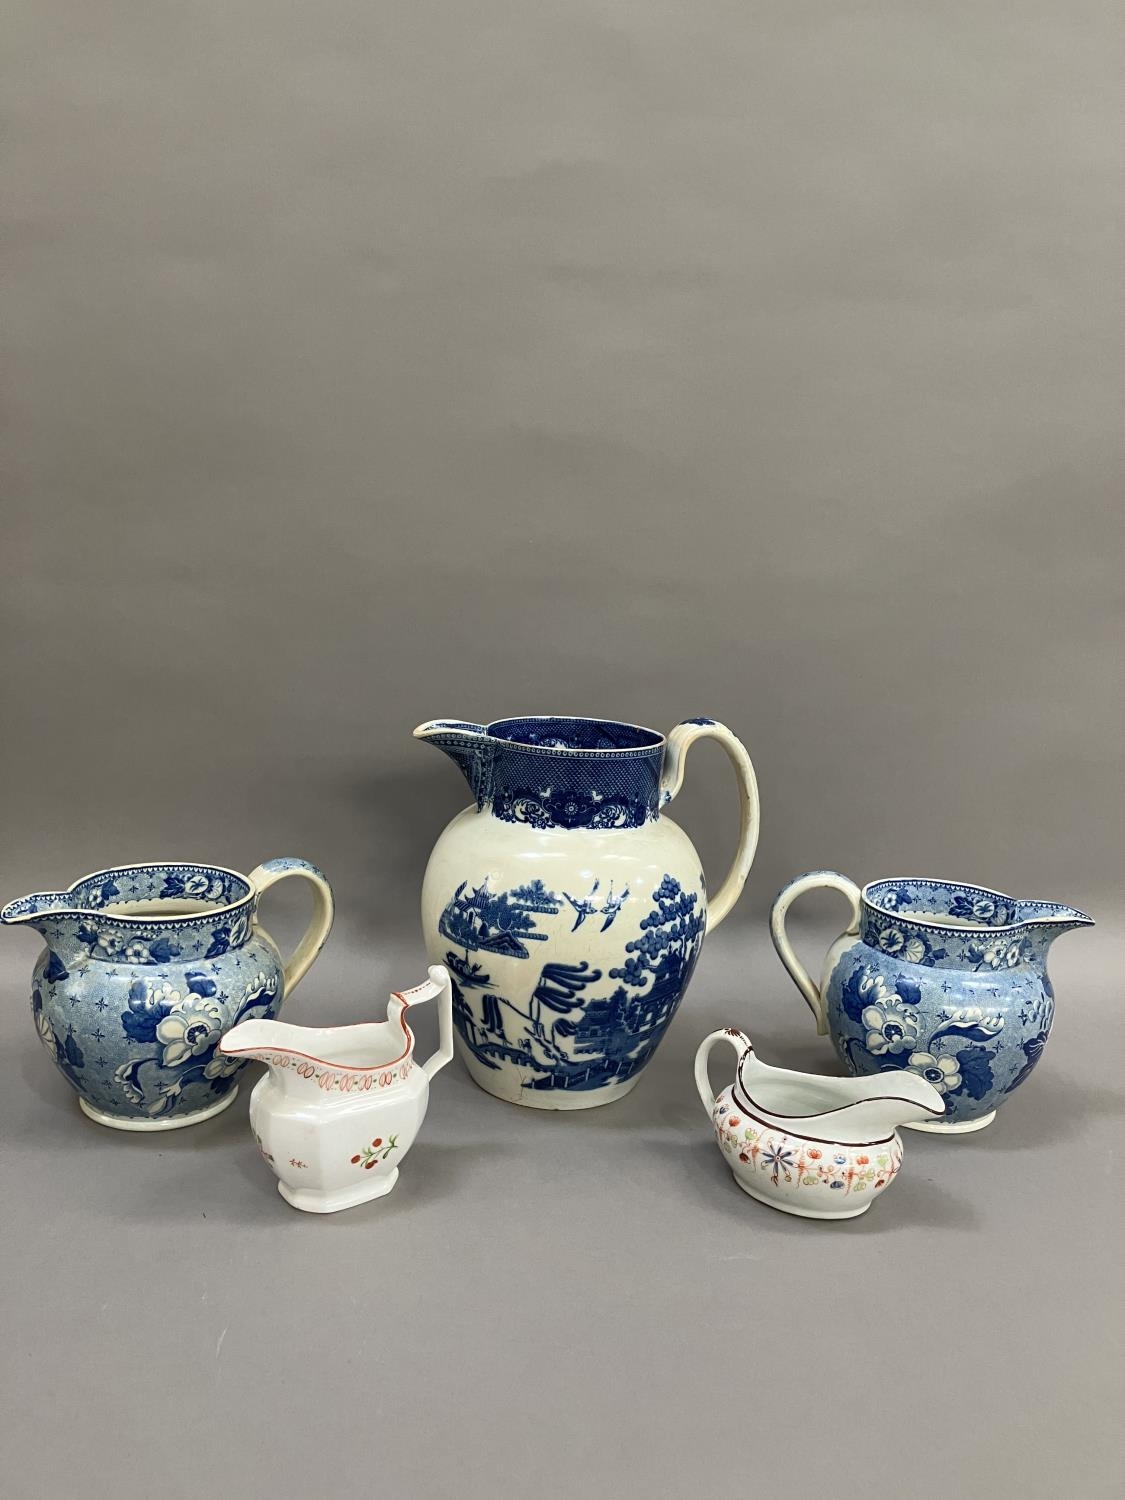 A pair of 19th century blue and white transfer printed jugs of floral pattern, 14cm over handle - Image 2 of 7